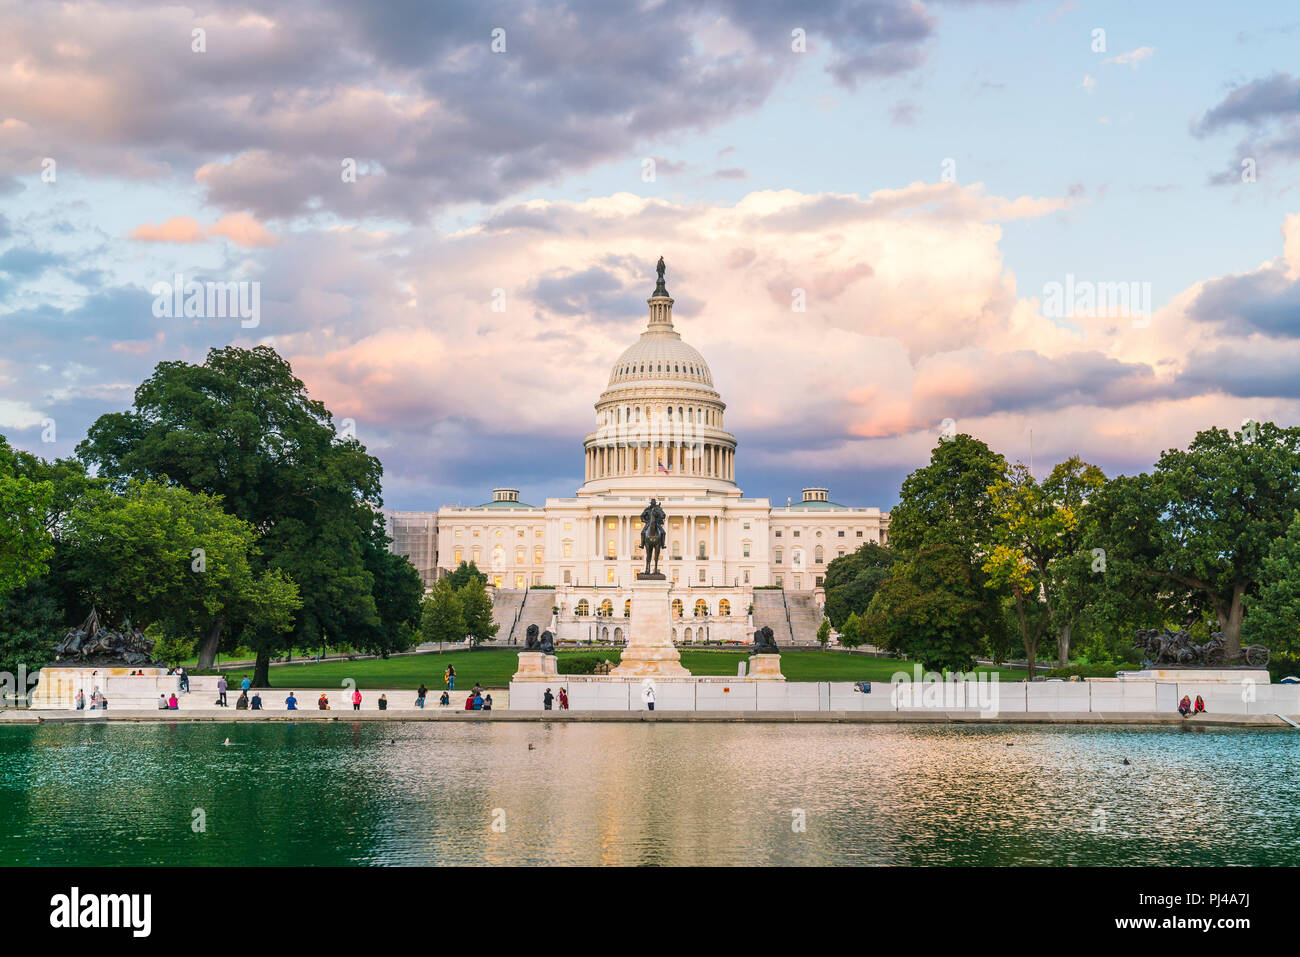 The United States Capitol building at sunset wirh reflection in water. Stock Photo